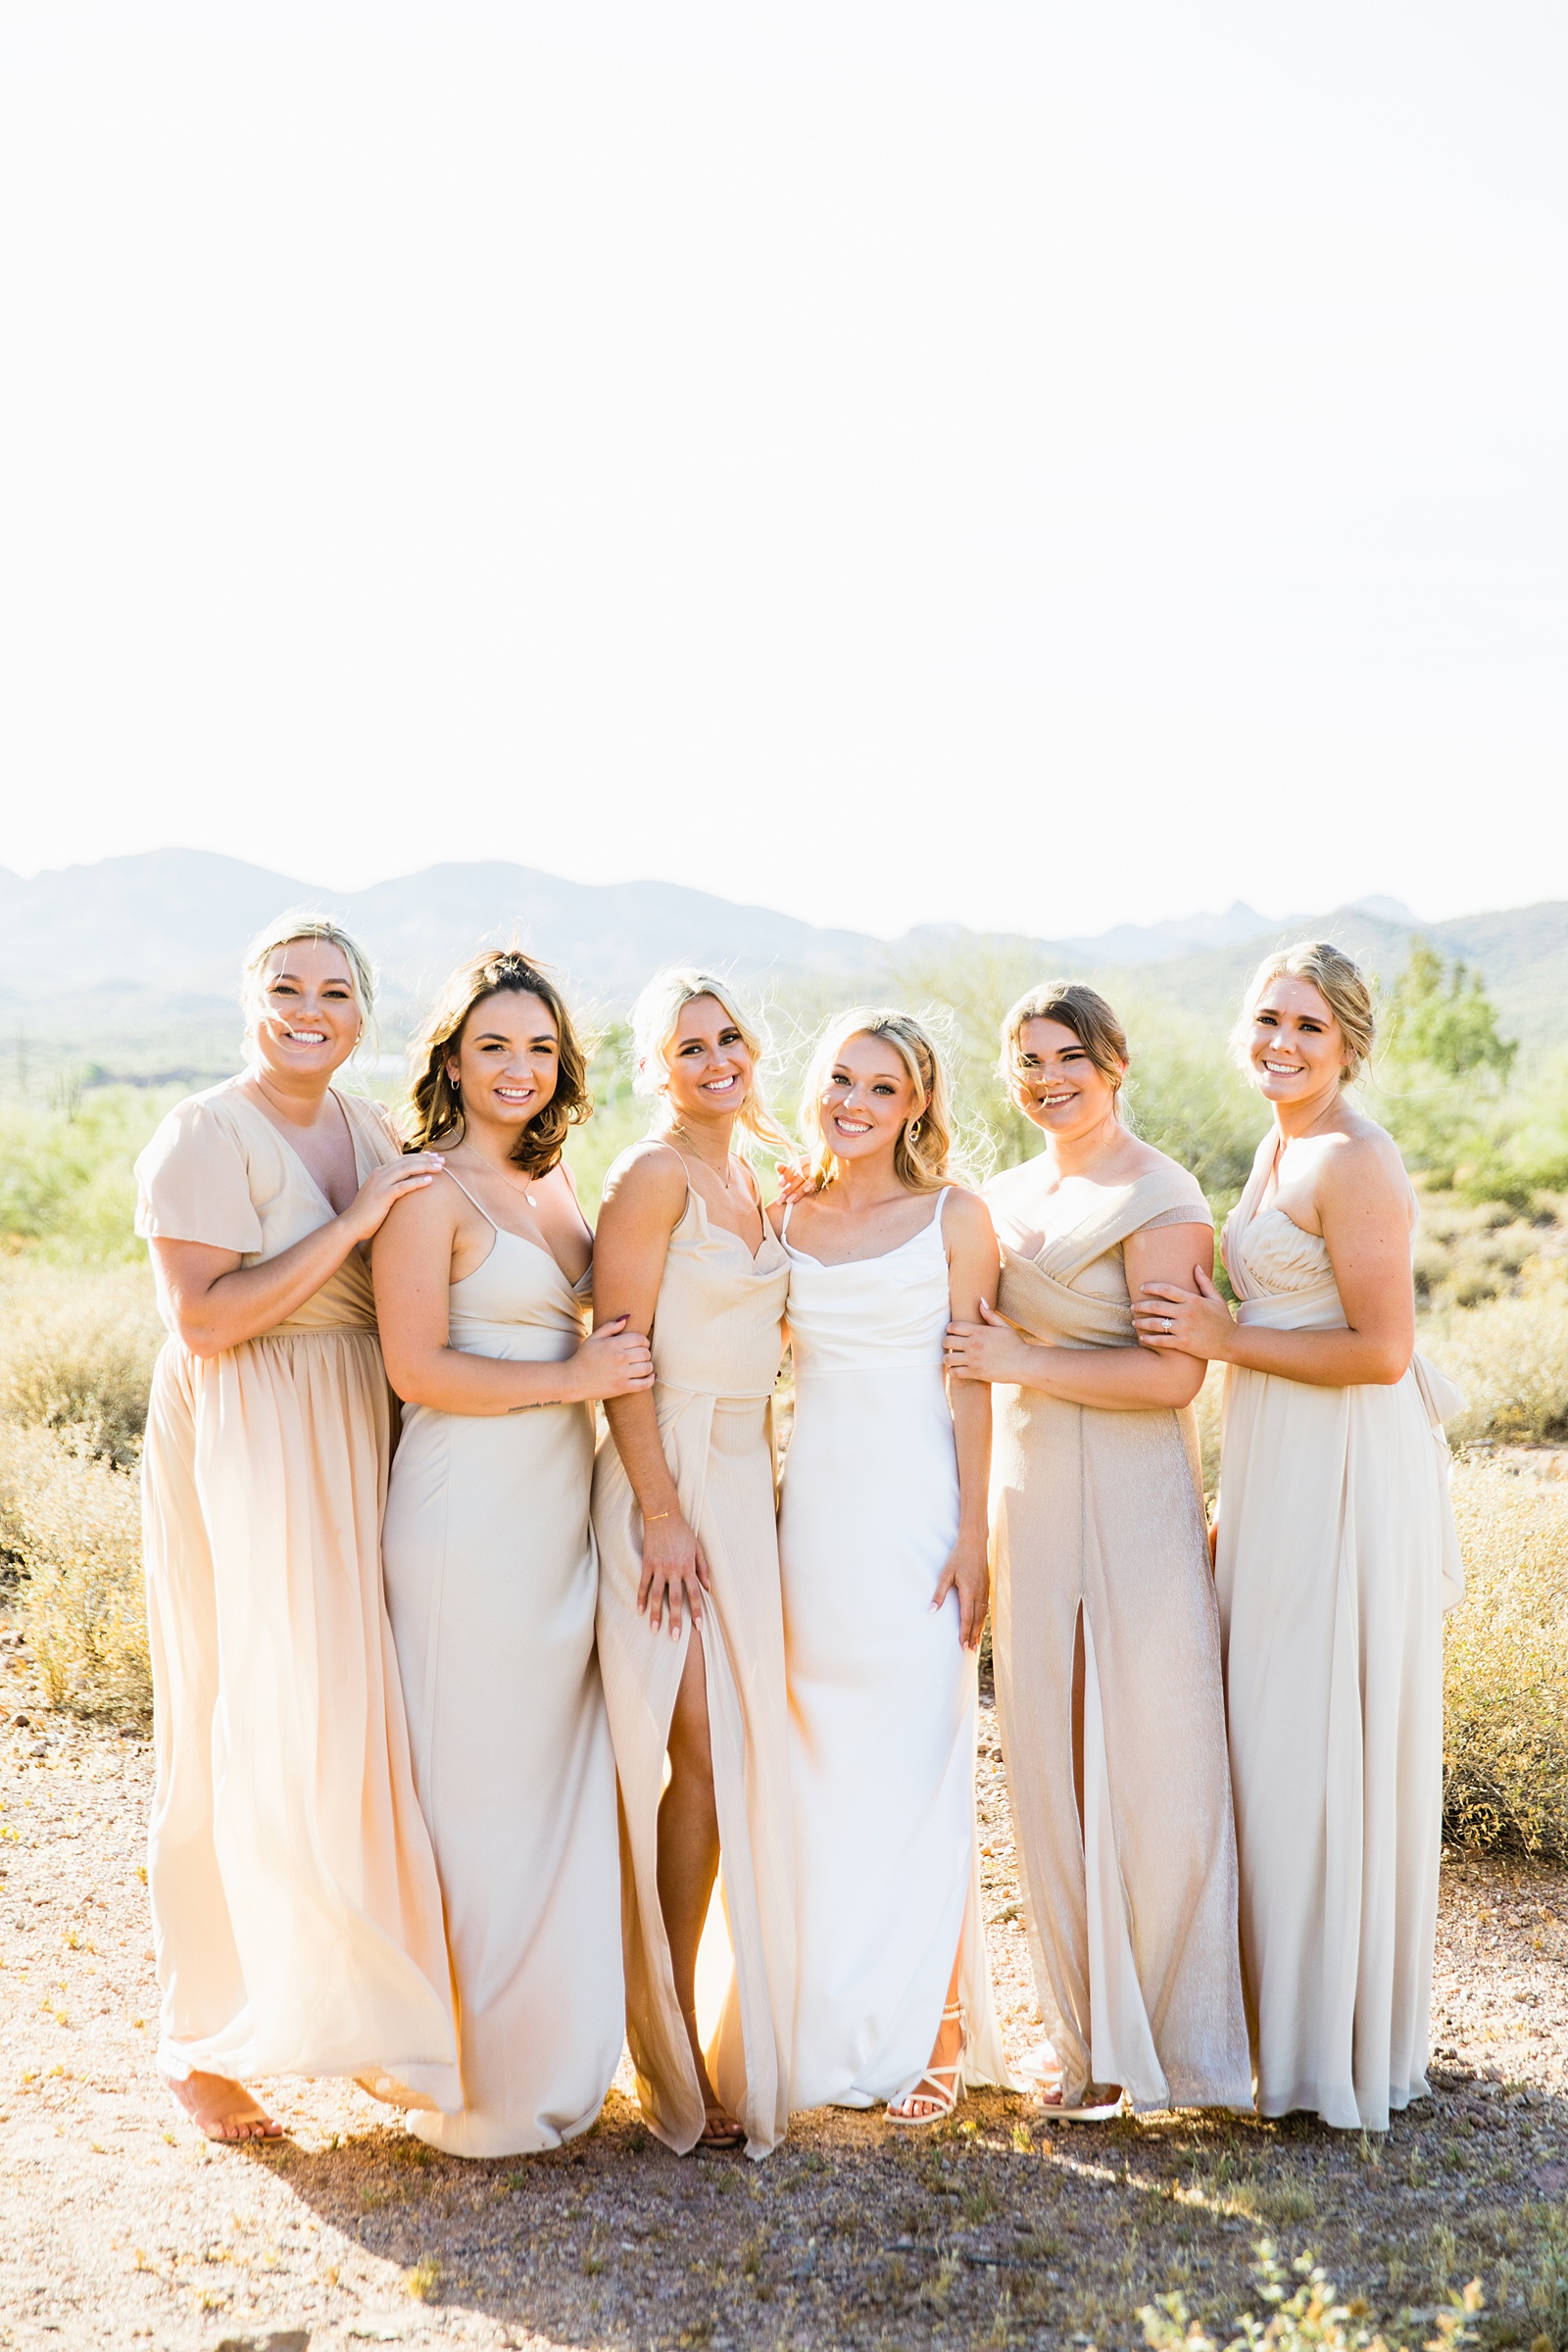 Bride and bridesmaids together at a Superstition Mountain Micro wedding by Arizona wedding photographer PMA Photography.